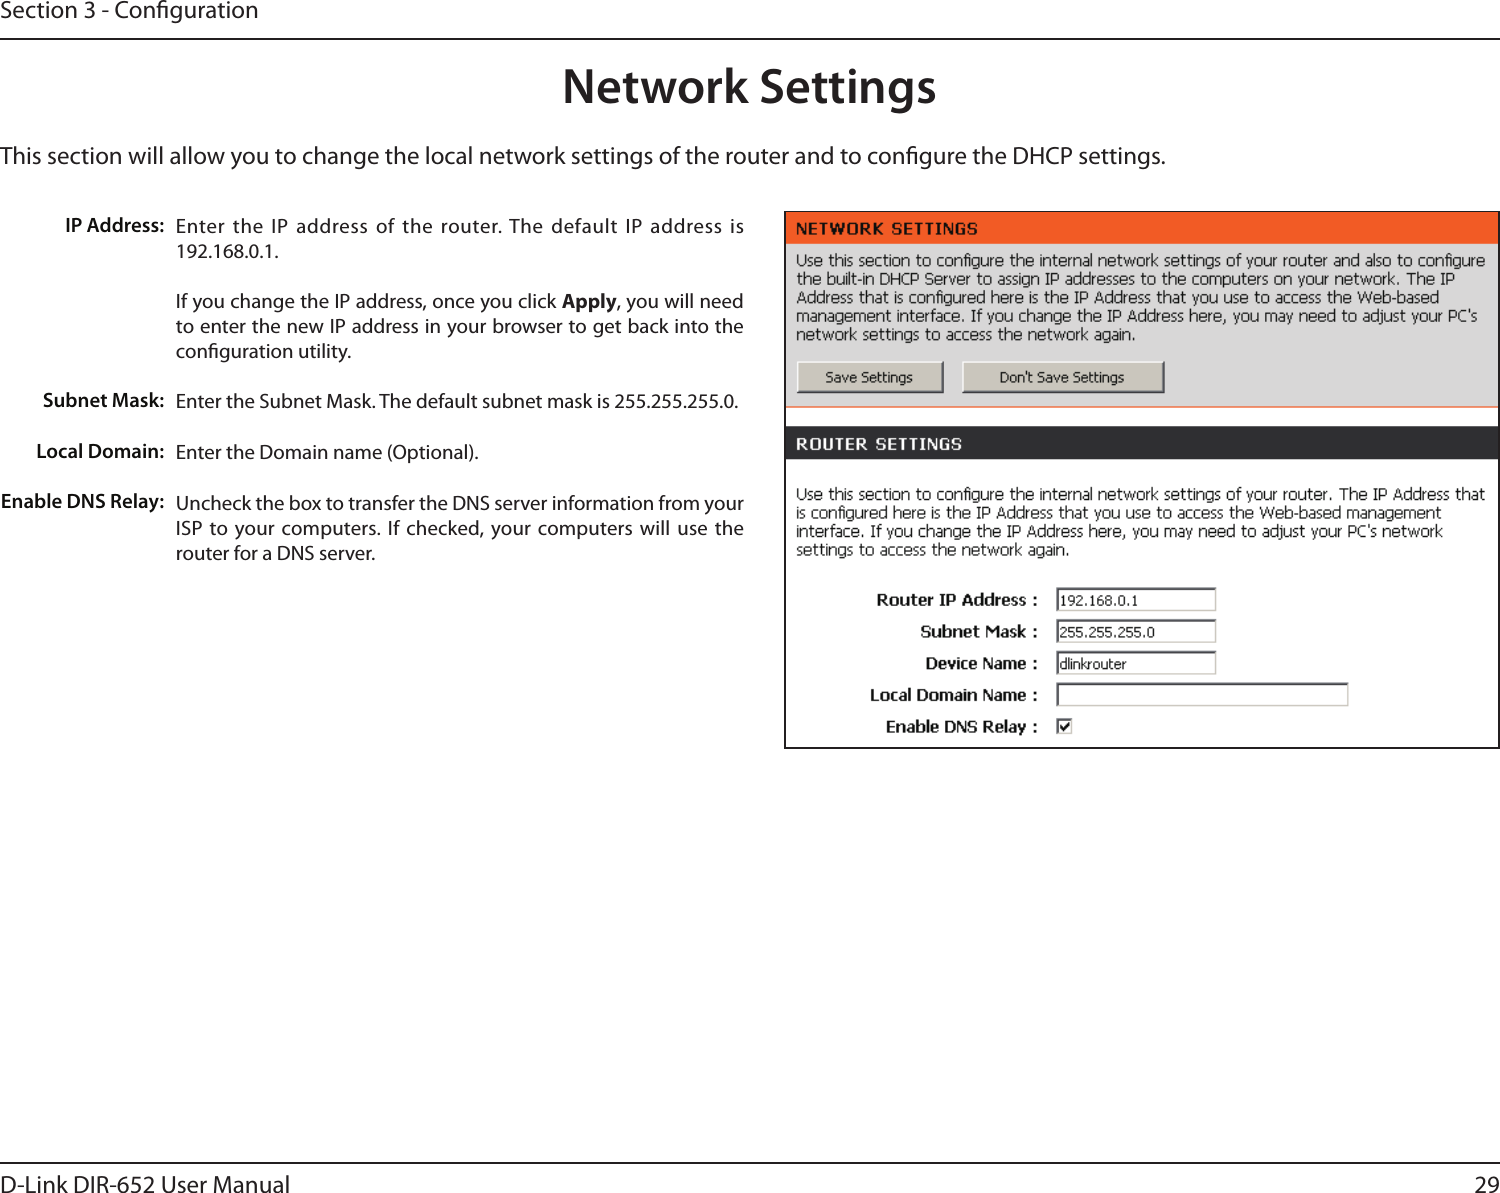 29D-Link DIR-652 User ManualSection 3 - CongurationThis section will allow you to change the local network settings of the router and to congure the DHCP settings.Network SettingsEnter the IP  address of  the  router. The default IP  address is 192.168.0.1.If you change the IP address, once you click Apply, you will need to enter the new IP address in your browser to get back into the conguration utility.Enter the Subnet Mask. The default subnet mask is 255.255.255.0.Enter the Domain name (Optional).Uncheck the box to transfer the DNS server information from your ISP to your computers. If  checked, your computers will  use  the router for a DNS server.IP Address:Subnet Mask:Local Domain:Enable DNS Relay: